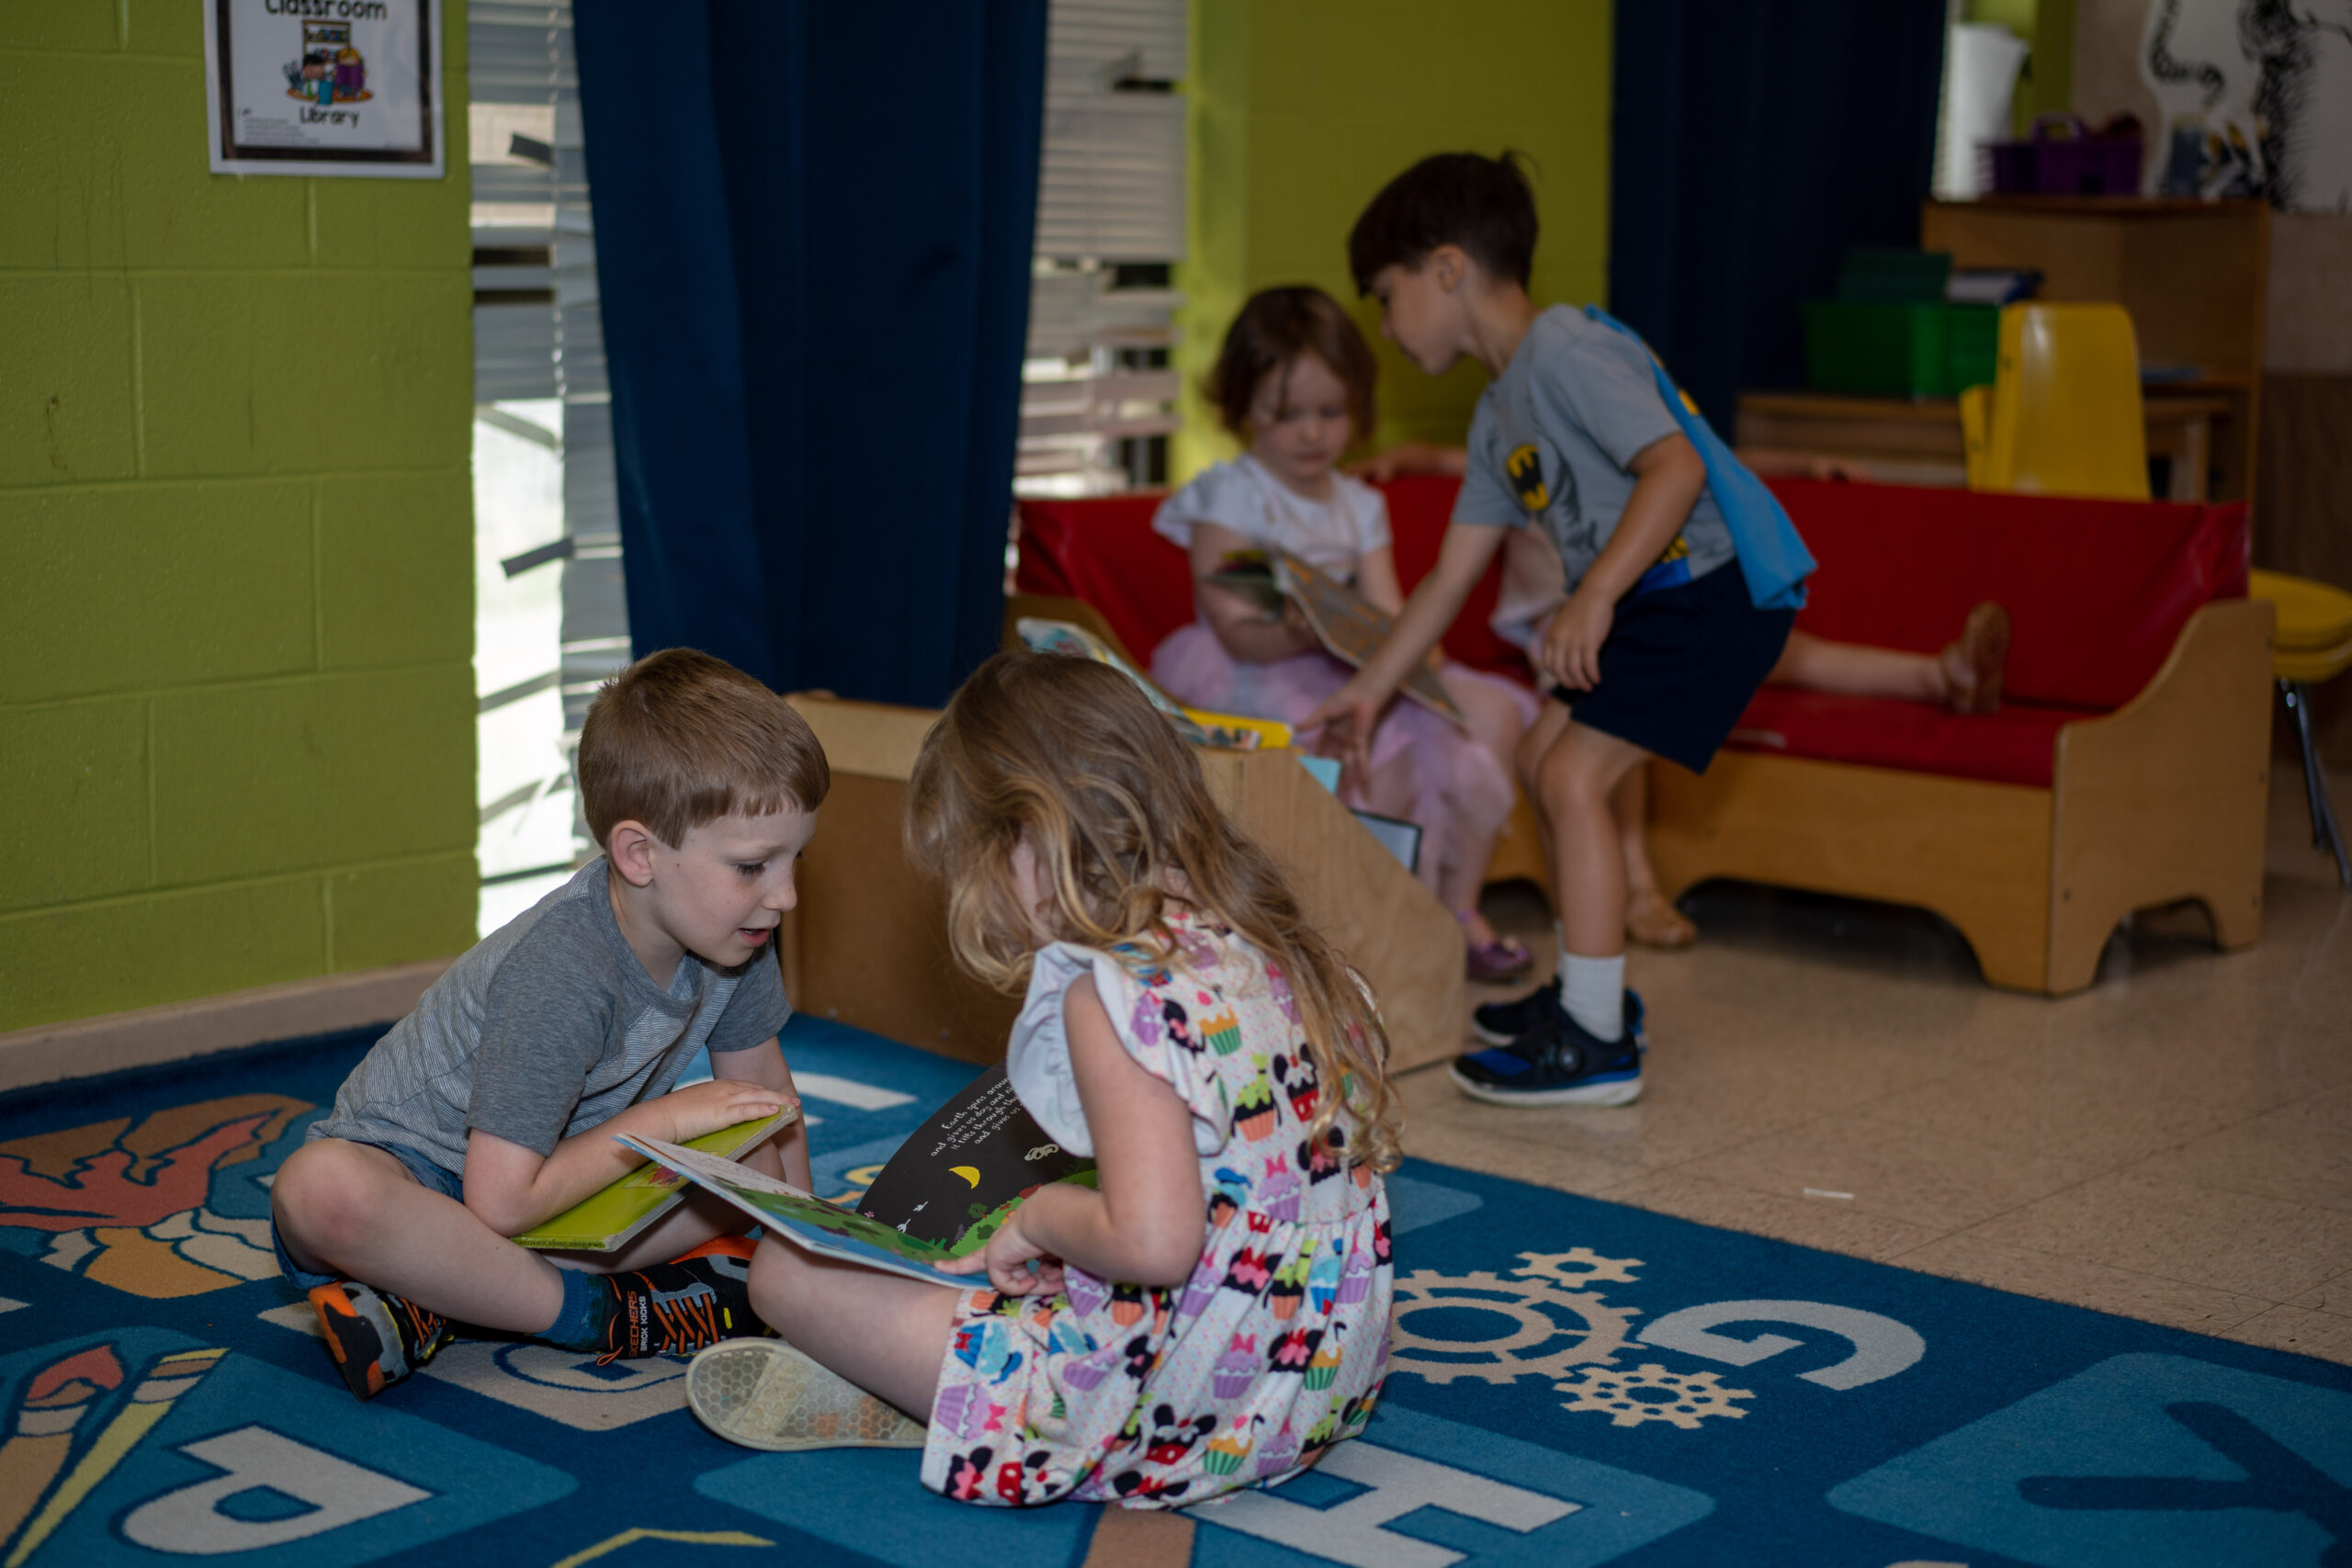 In the foreground, two preschoolers sit on a rug looking at a book. In the background, another preschooler looks at a book while a fourth child reaches for a book on a shelf.